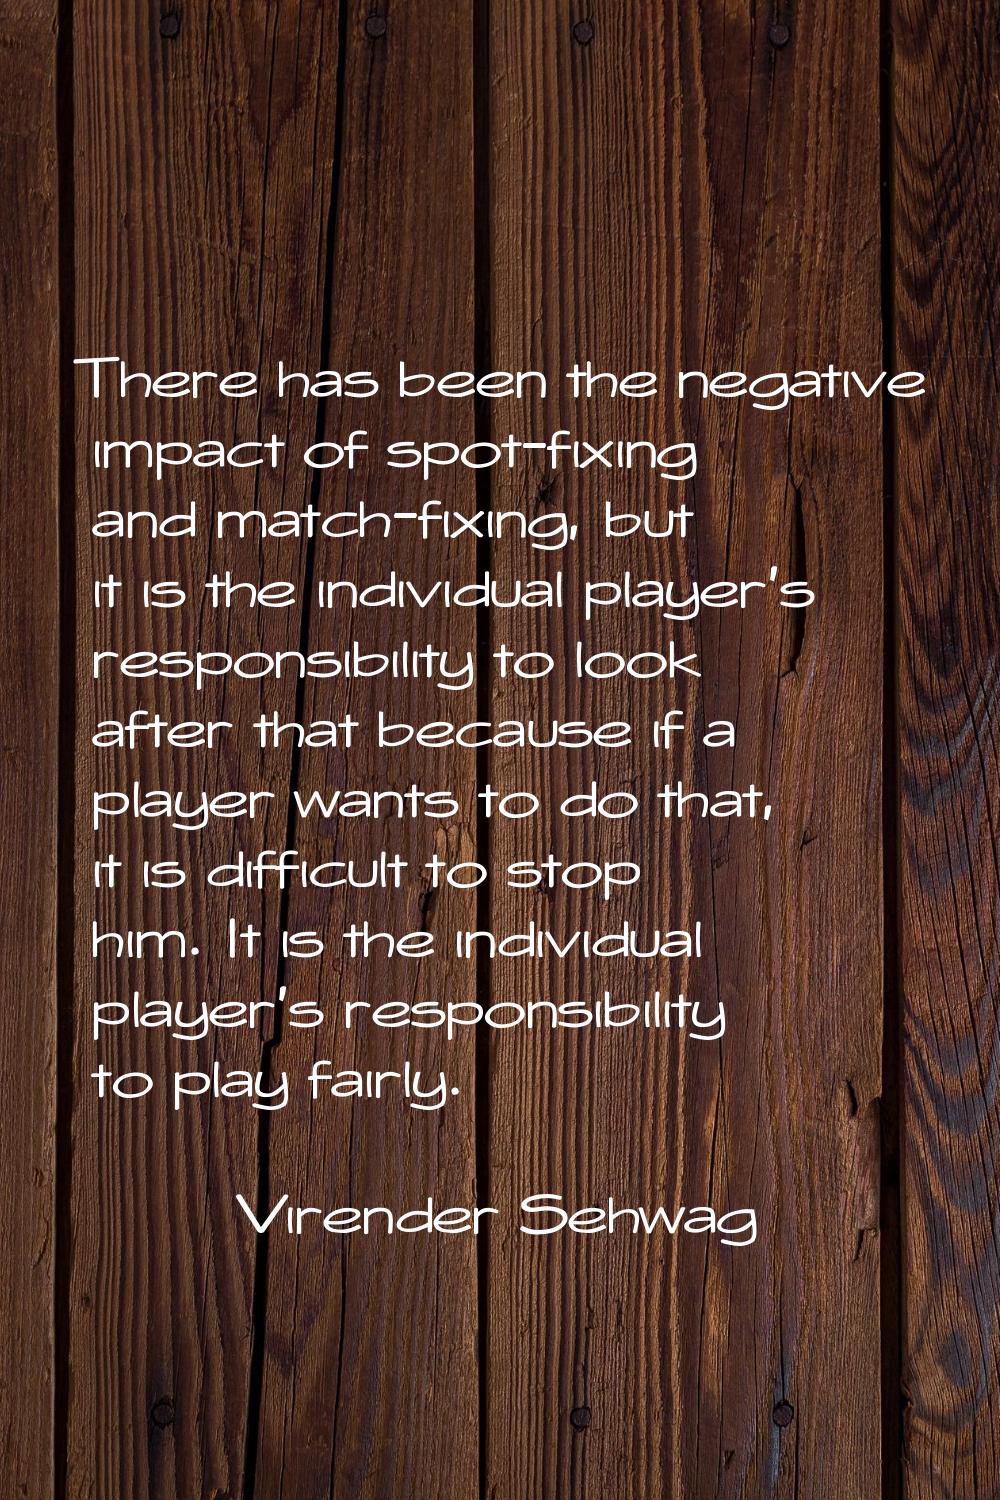 There has been the negative impact of spot-fixing and match-fixing, but it is the individual player